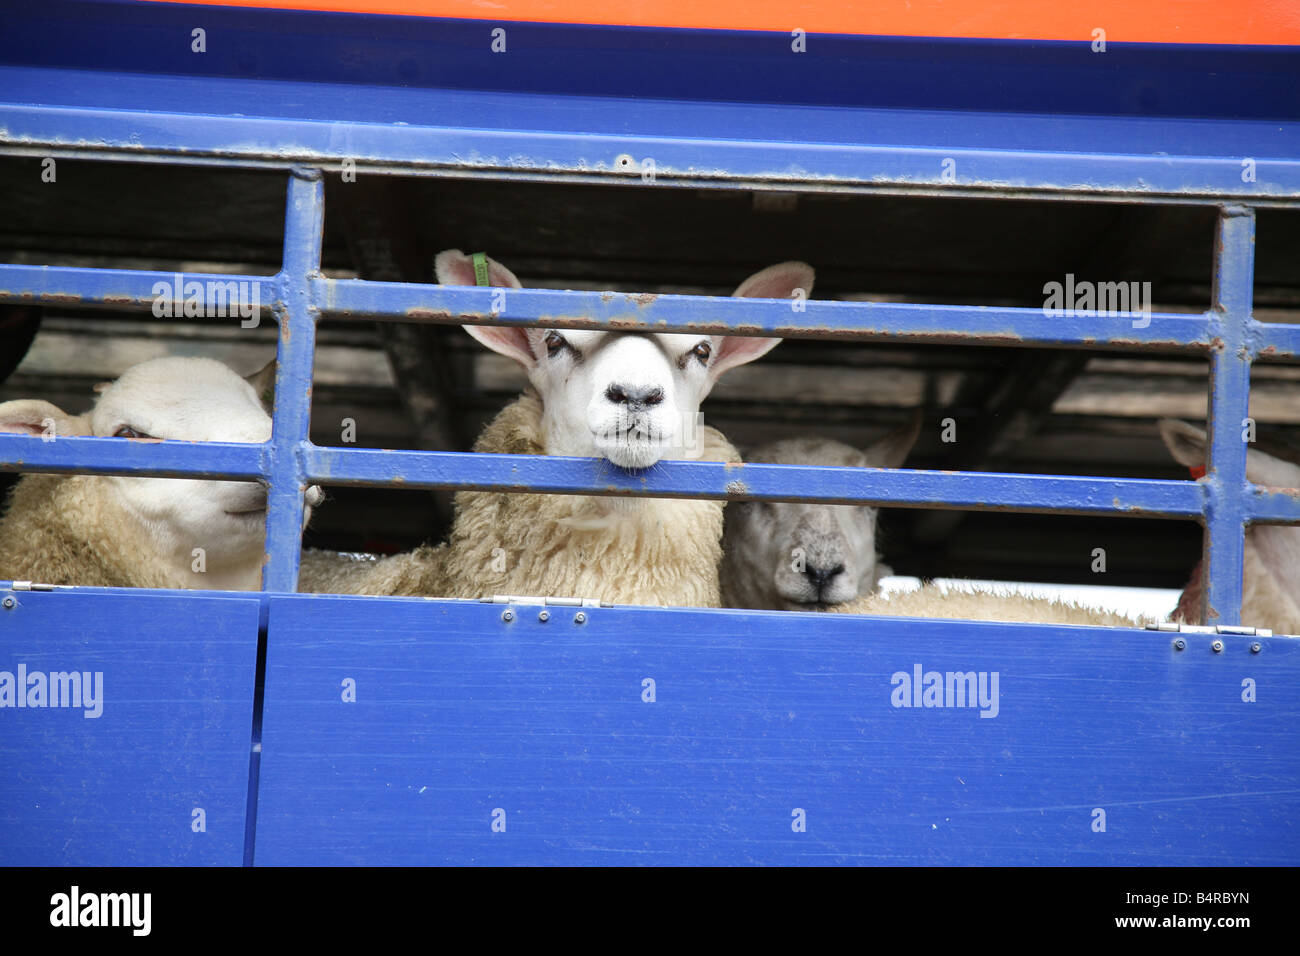 Sheep On A lorry in Welshpool Market Wales Stock Photo